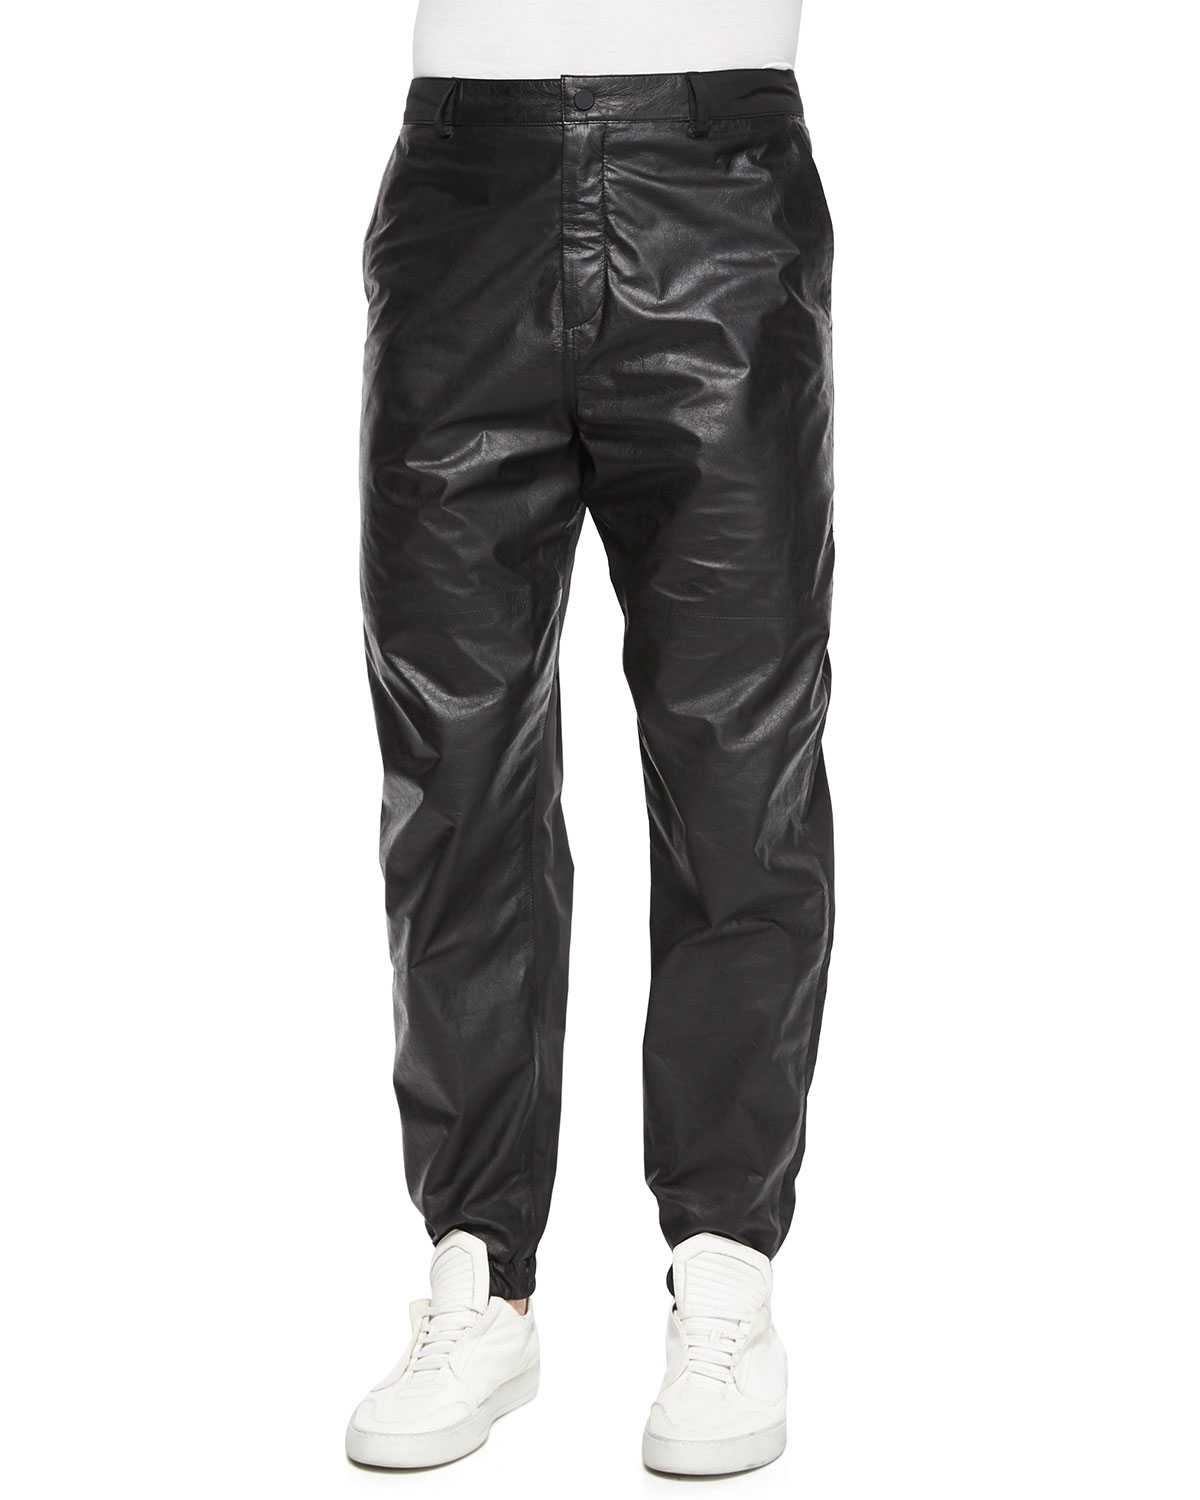 Lyst - T By Alexander Wang Leather/nylon Mix Track Pants in Black for Men